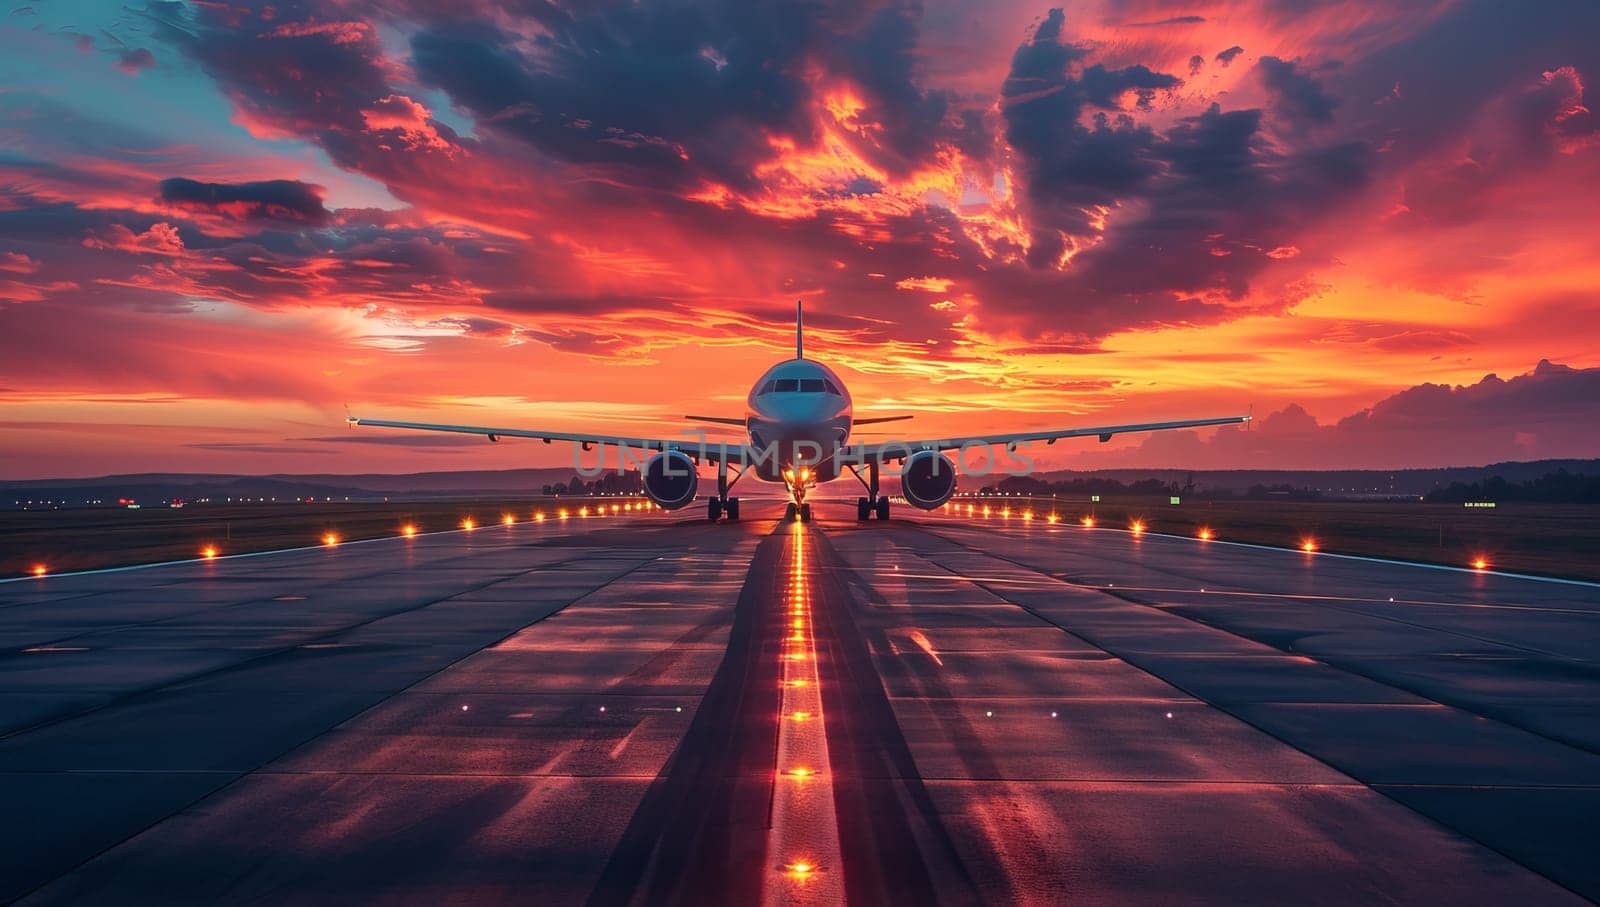 Airplane on the runway of the airport with a beautiful sunset. by ailike